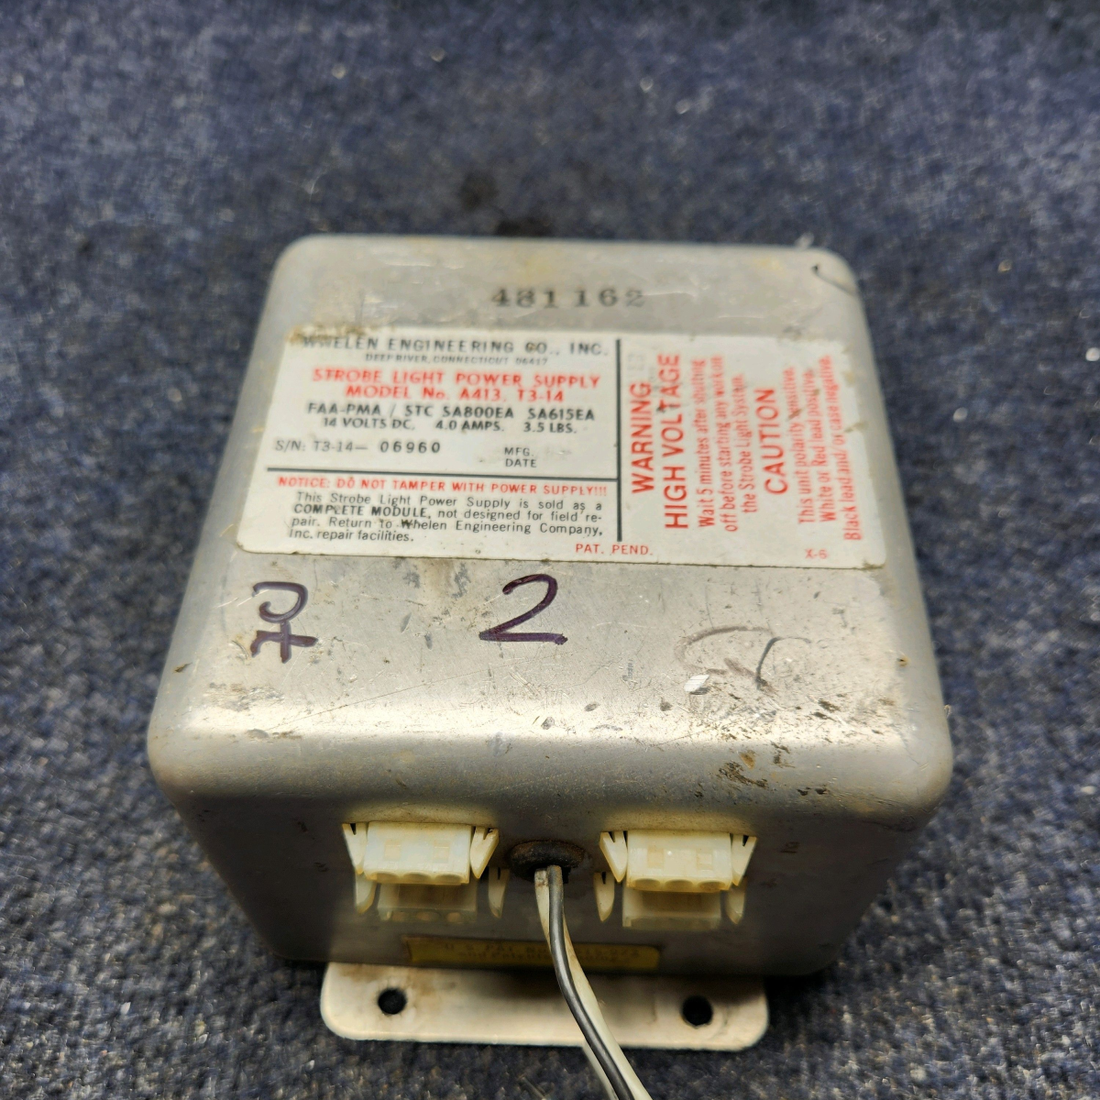 Used aircraft parts for sale, A413,T3-14 Whelen Strobe Power Supply WHELEN STROBE LIGHT POWER SUPPLY "FOR PARTS ONLY" 14VOLTS